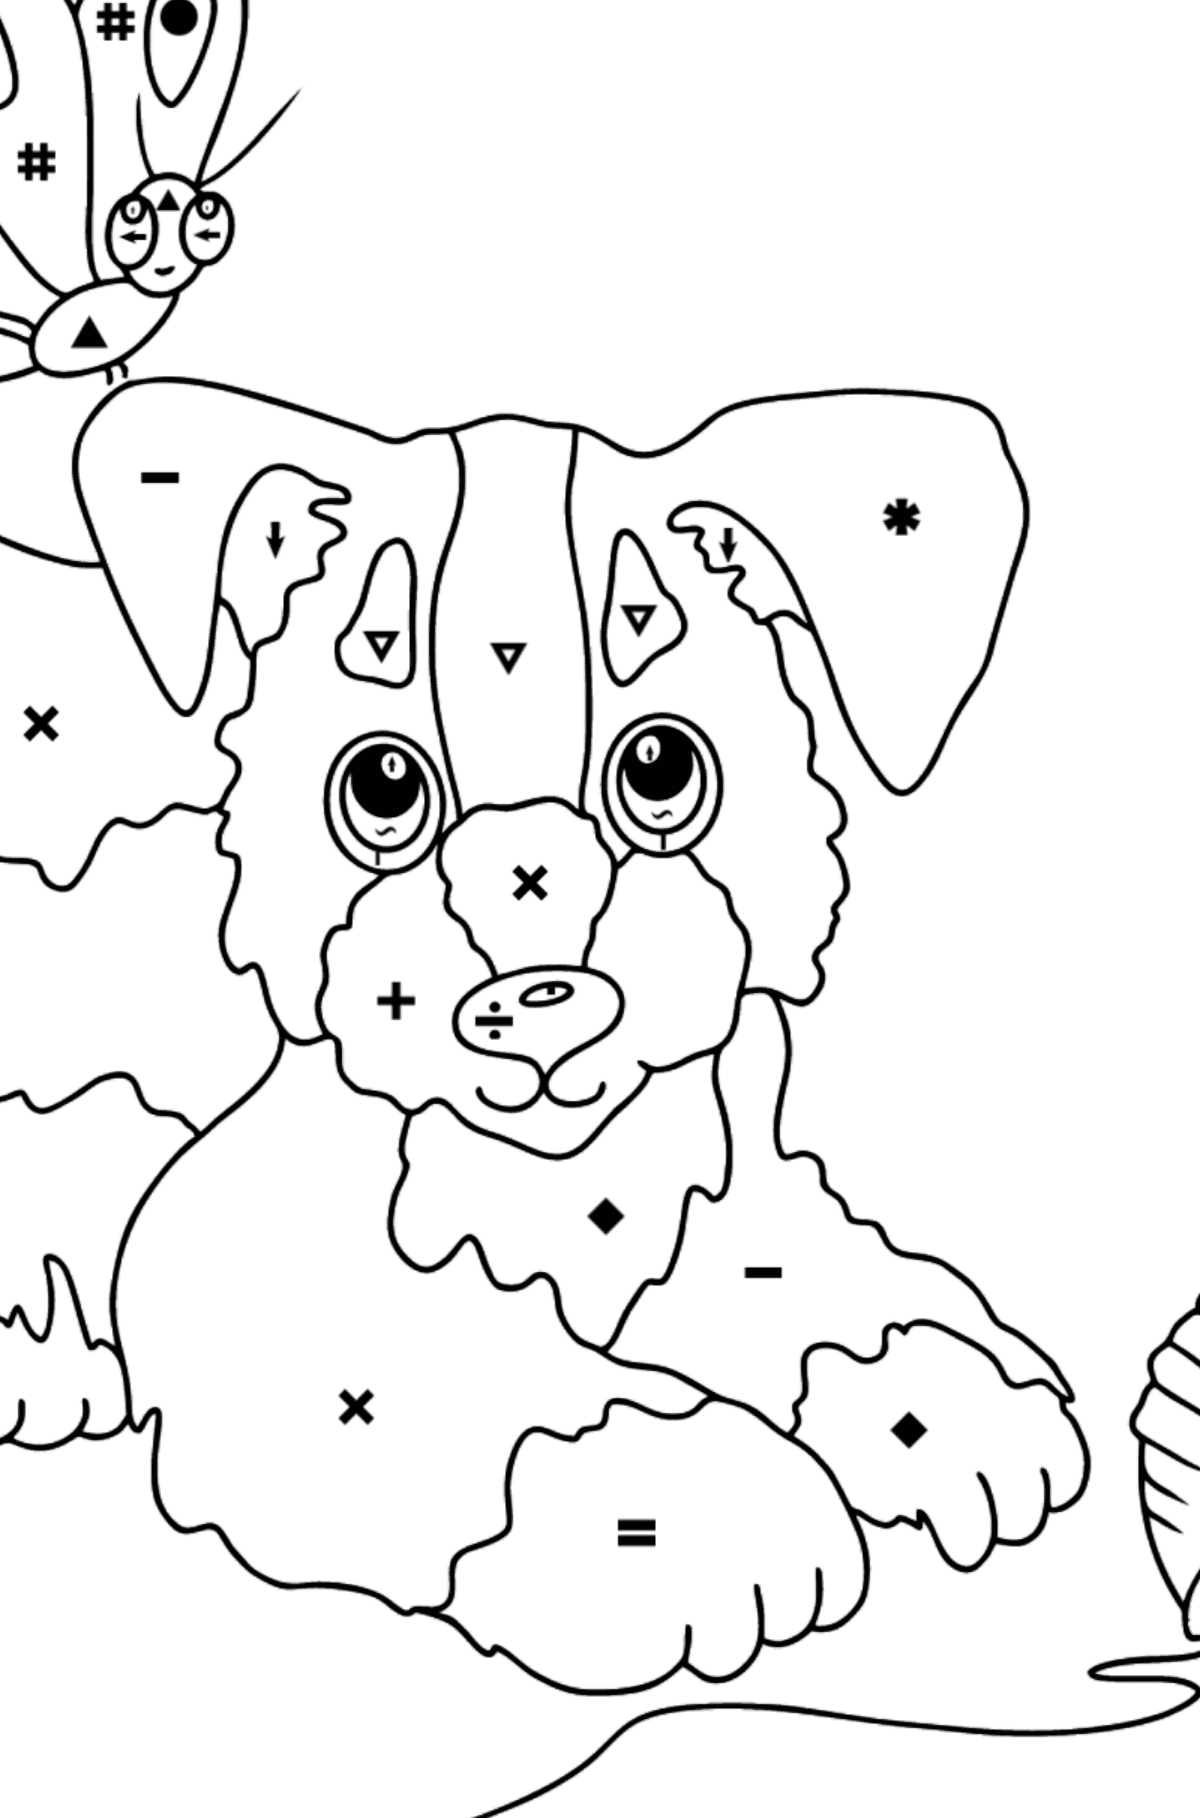 Coloring Page - A Dog is Playing with a Ball of Yarn and Butterflies - Coloring by Symbols for Kids